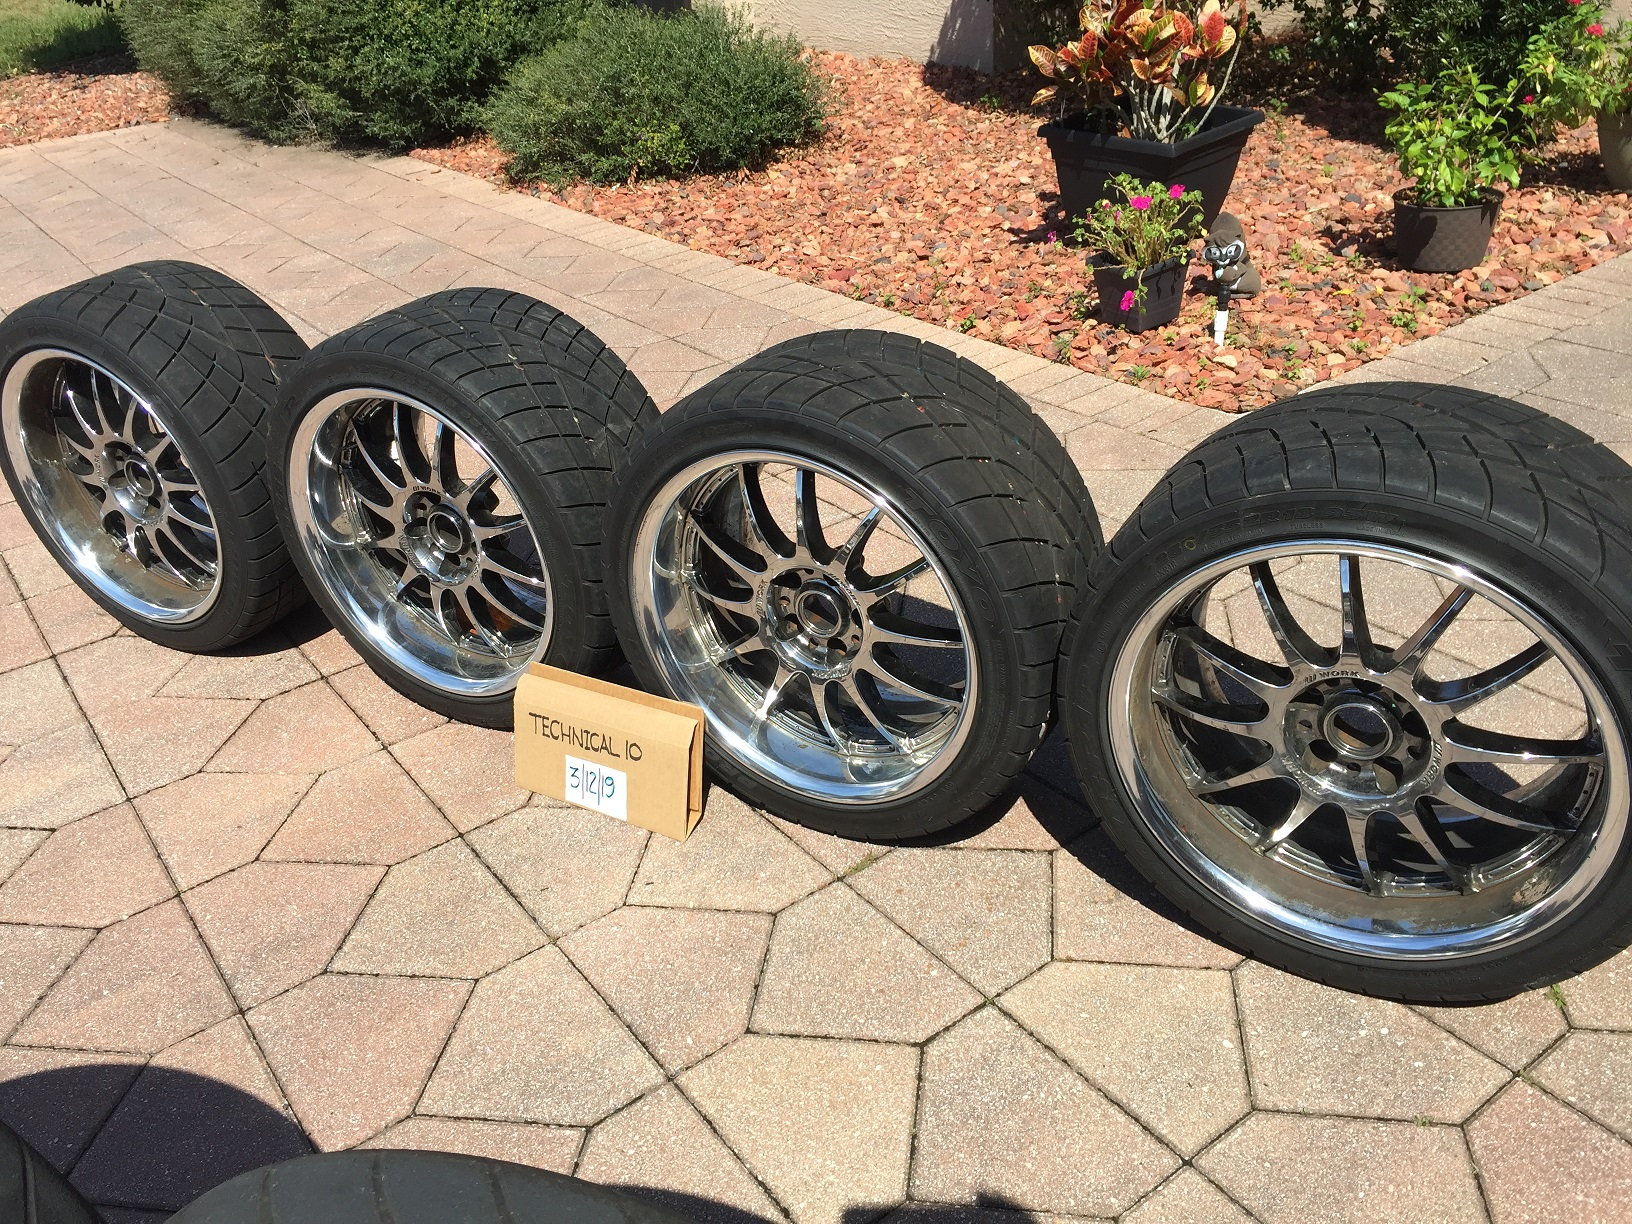 Wheels and Tires/Axles - WORK XSA 18x10 +18 w/ Toyo R1R 265/35/18 tires - Used - 2003 to 2015 Mitsubishi Lancer Evolution - Inverness, FL 34453, United States